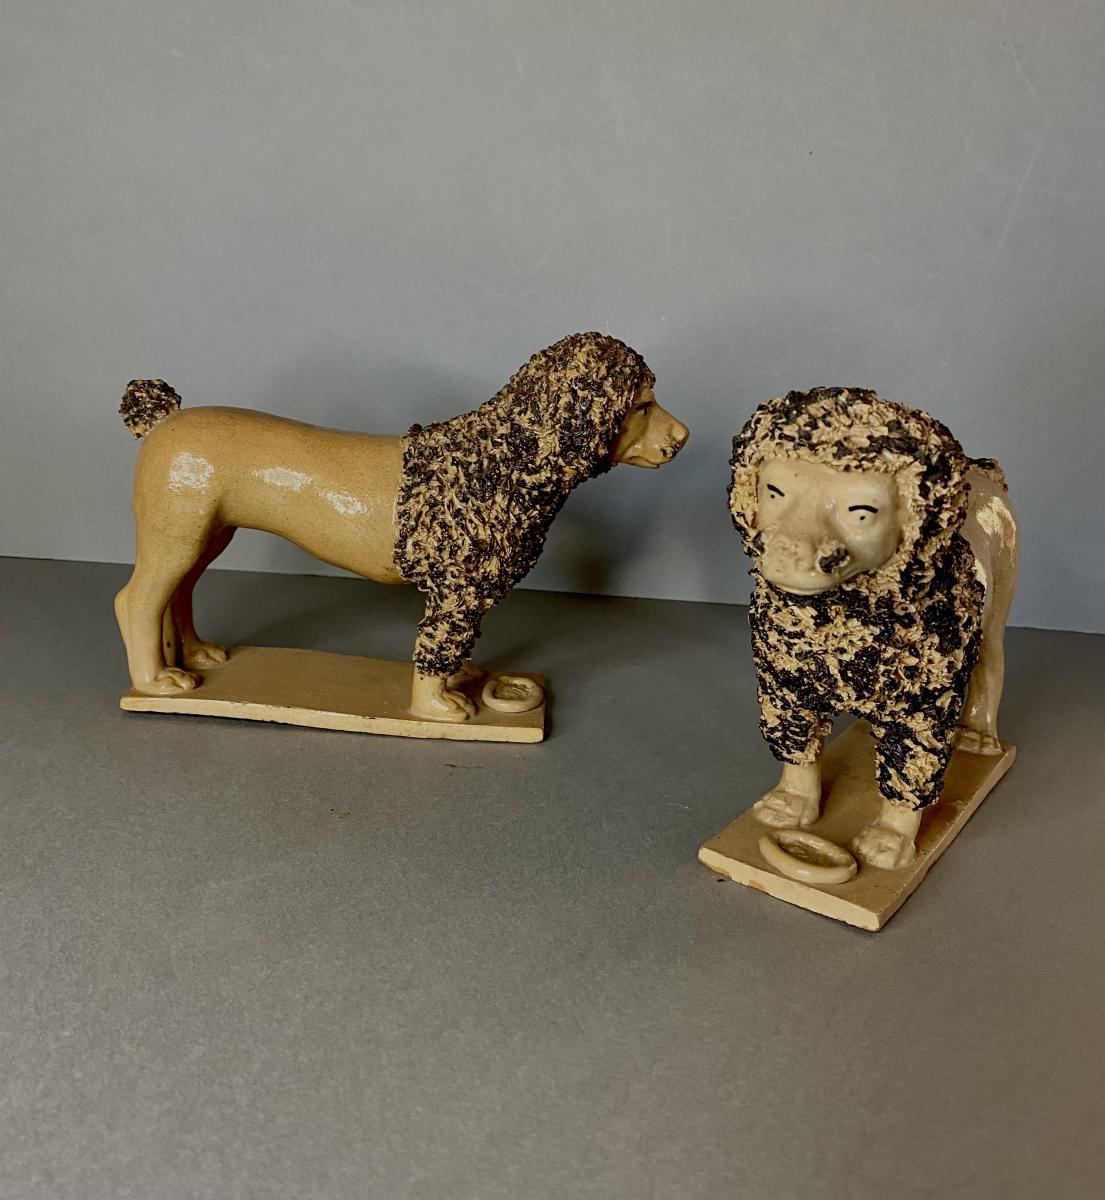 Wonderful early C19th Pair of Staffordshire pottery Poodles